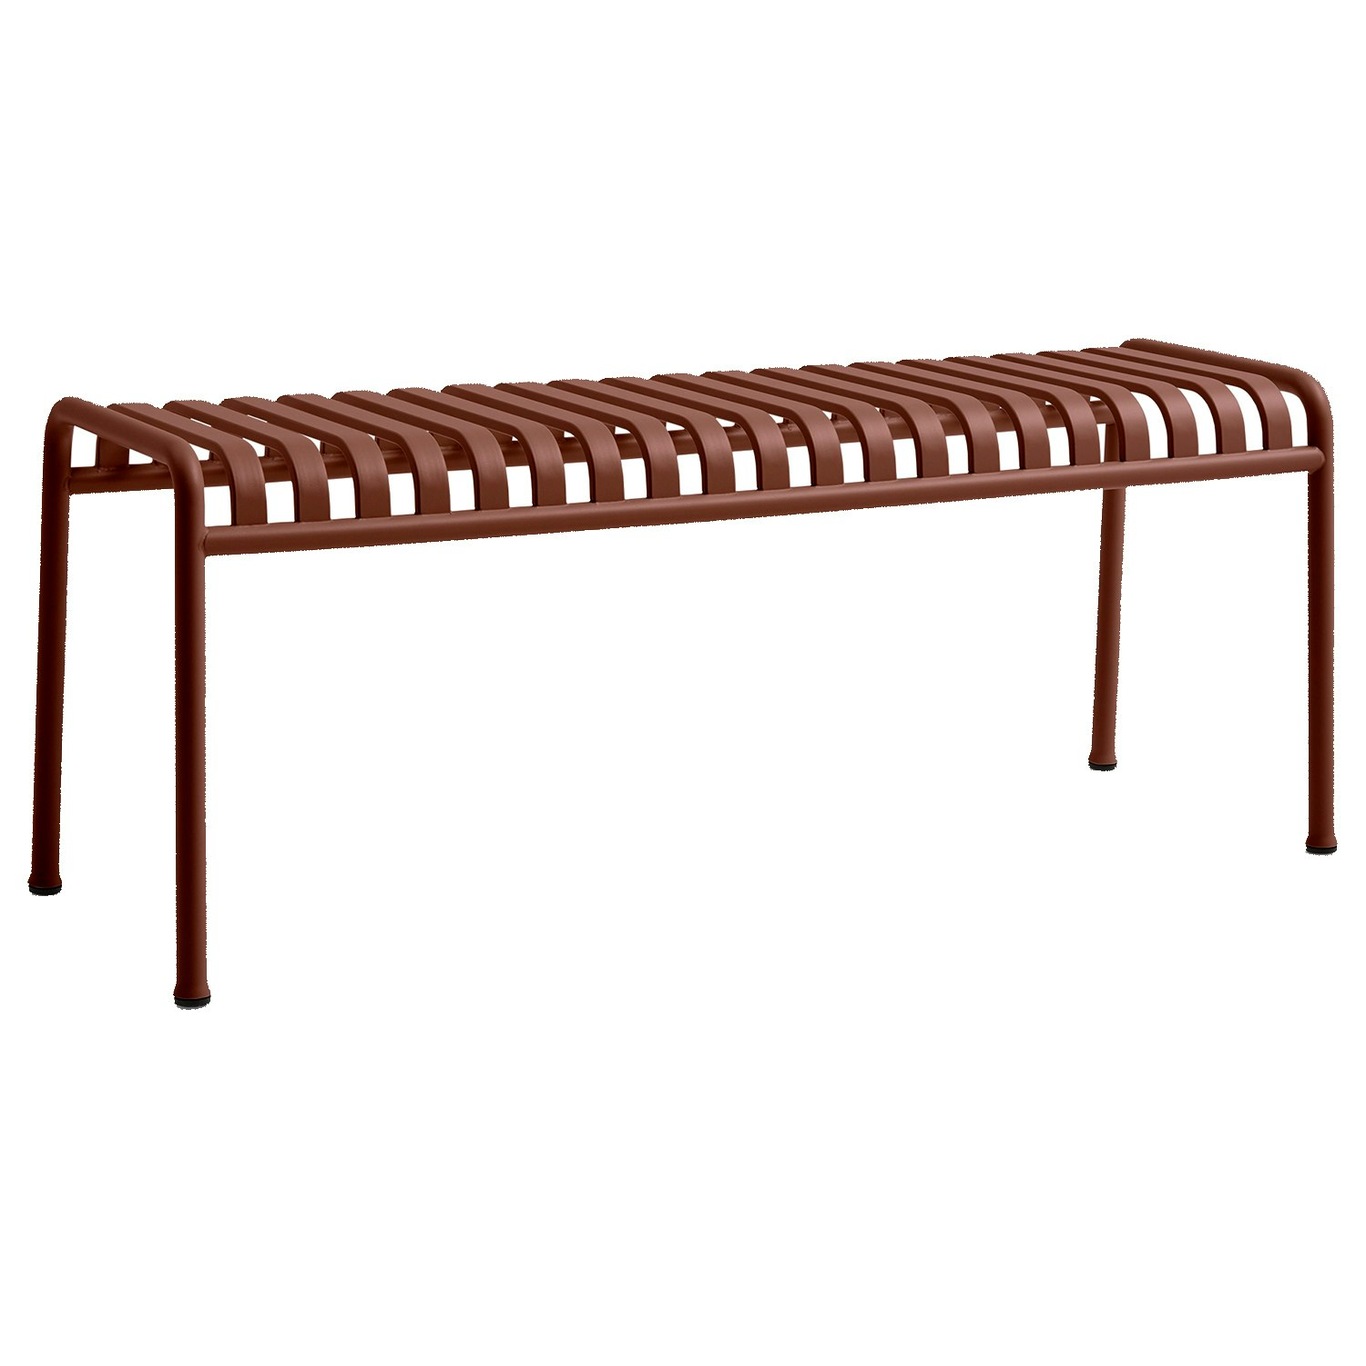 Palissade Bench, Iron Red